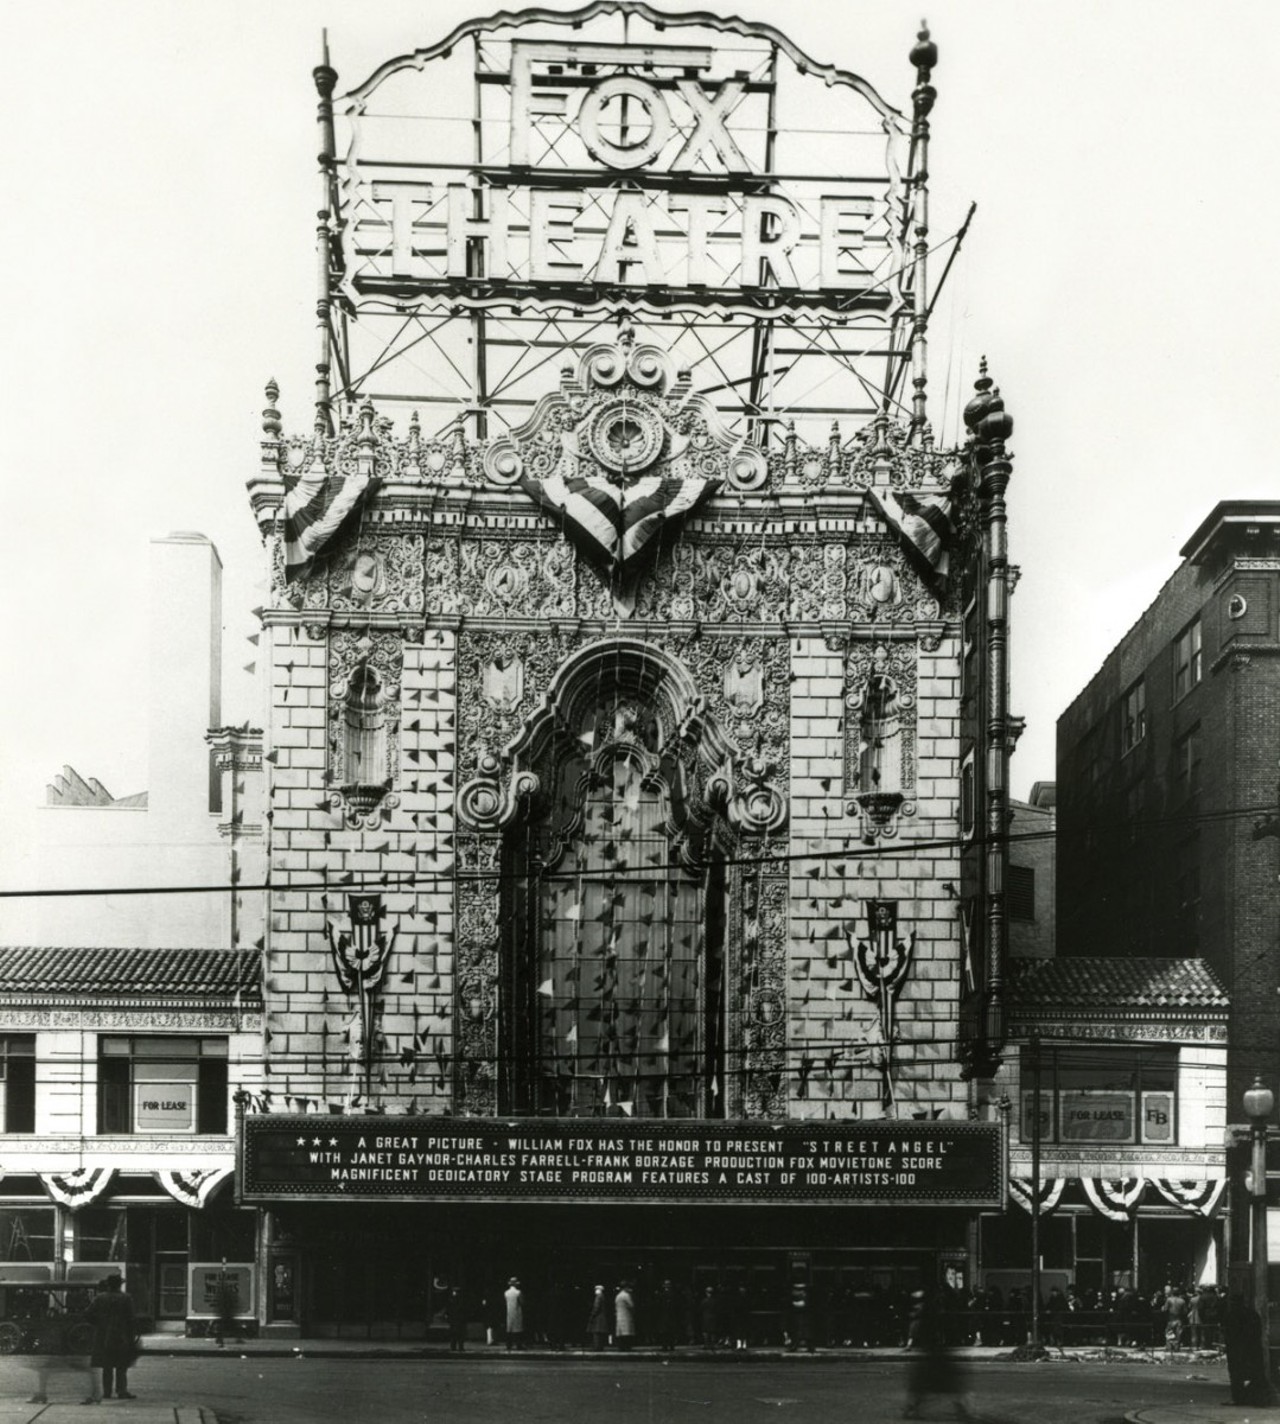 The Fox Theatre originally opened as part of William Fox's movie palace empire in 1929.  The architect, C. Howard Crane, built both the Fox in St. Louis and its twin theater in Detroit in Siamese Byzantine style.  Photo courtesy of MO Historical Society.